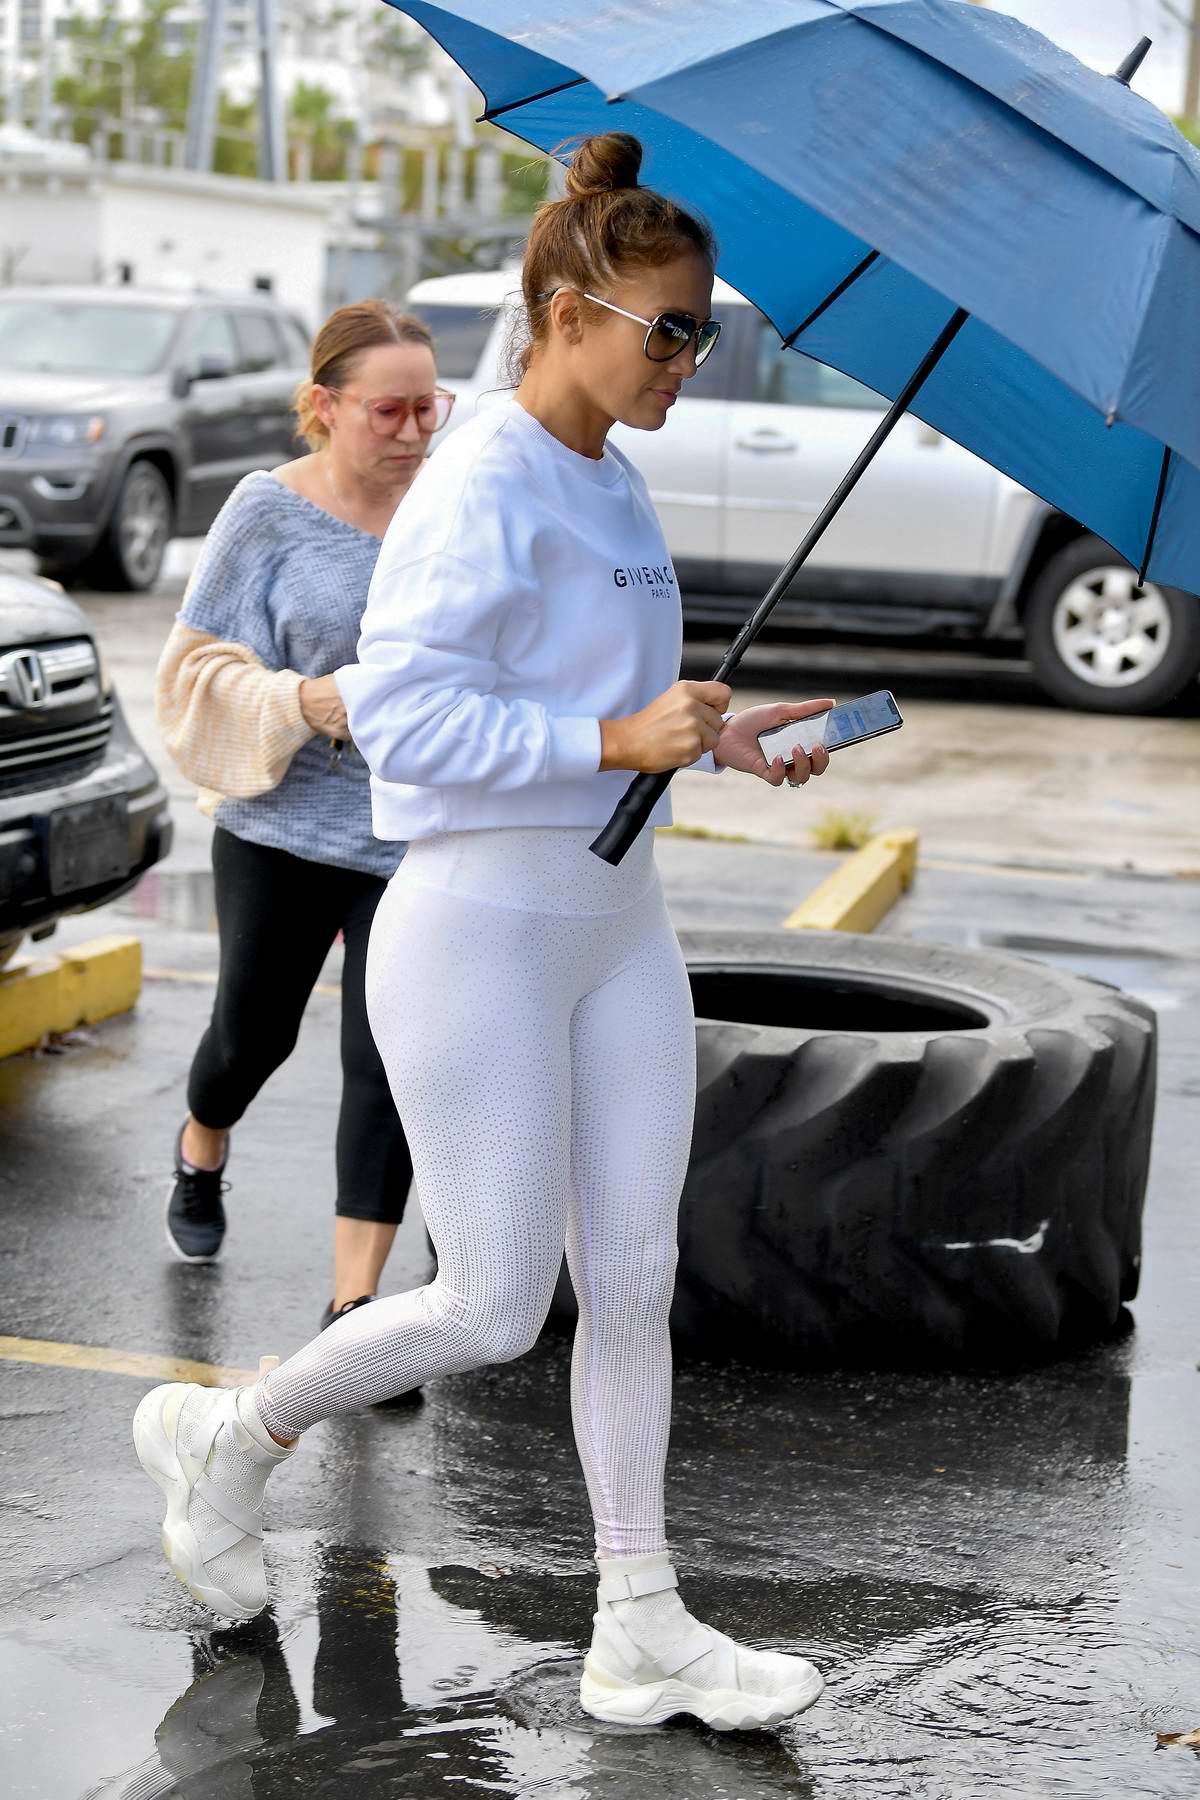 Jennifer Lopez Sports All-white As She Arrives At The Gym, 51% OFF